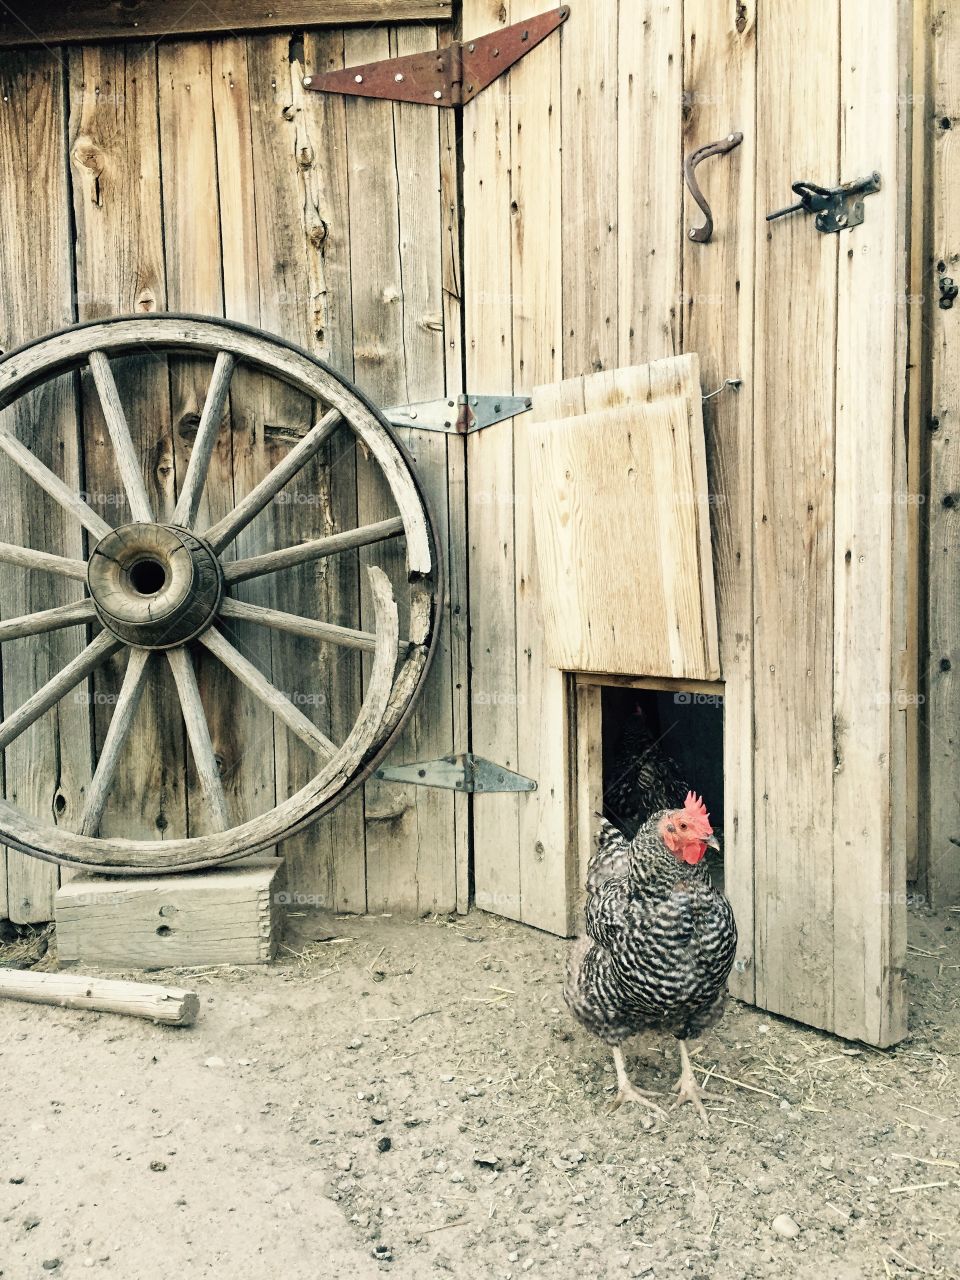 Chicken in the Barnyard . A chicken standing in an old barnyard